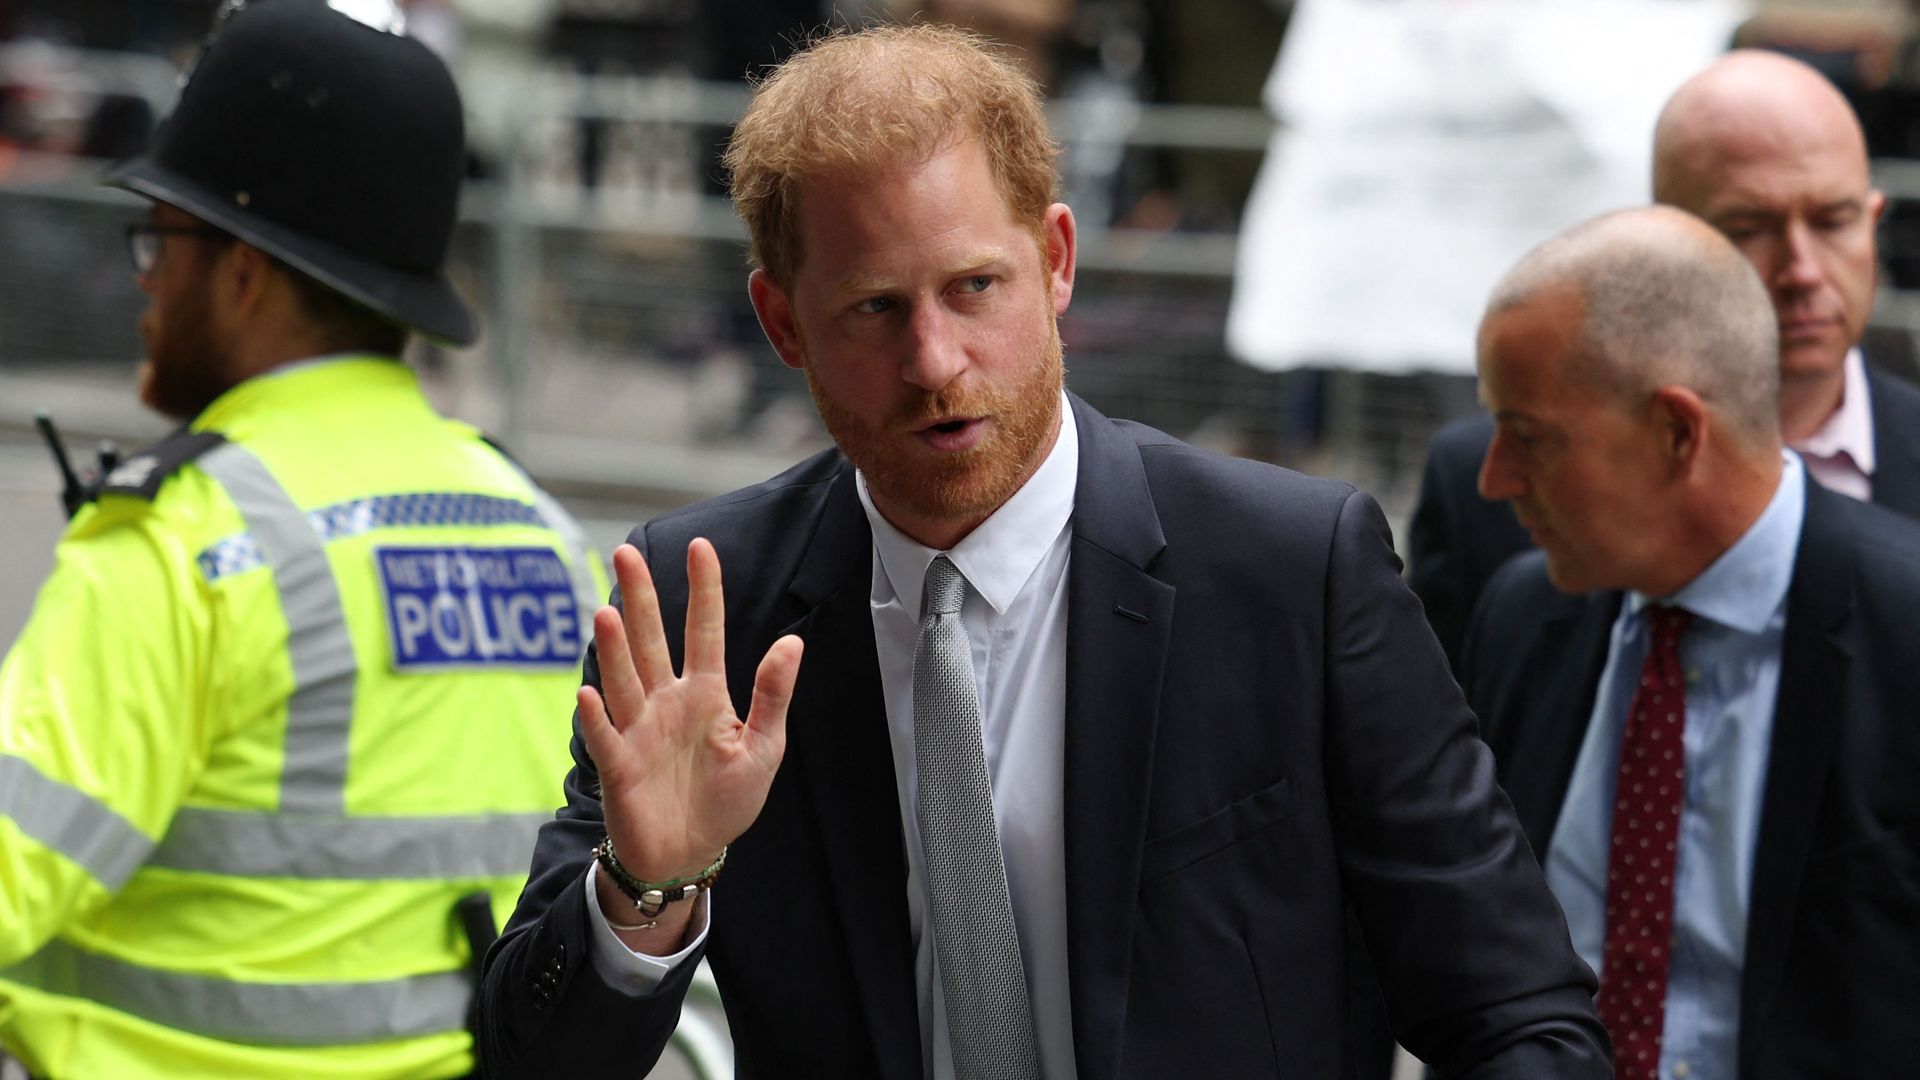 Royal fans divided over Prince Harry's starring role during court case ...